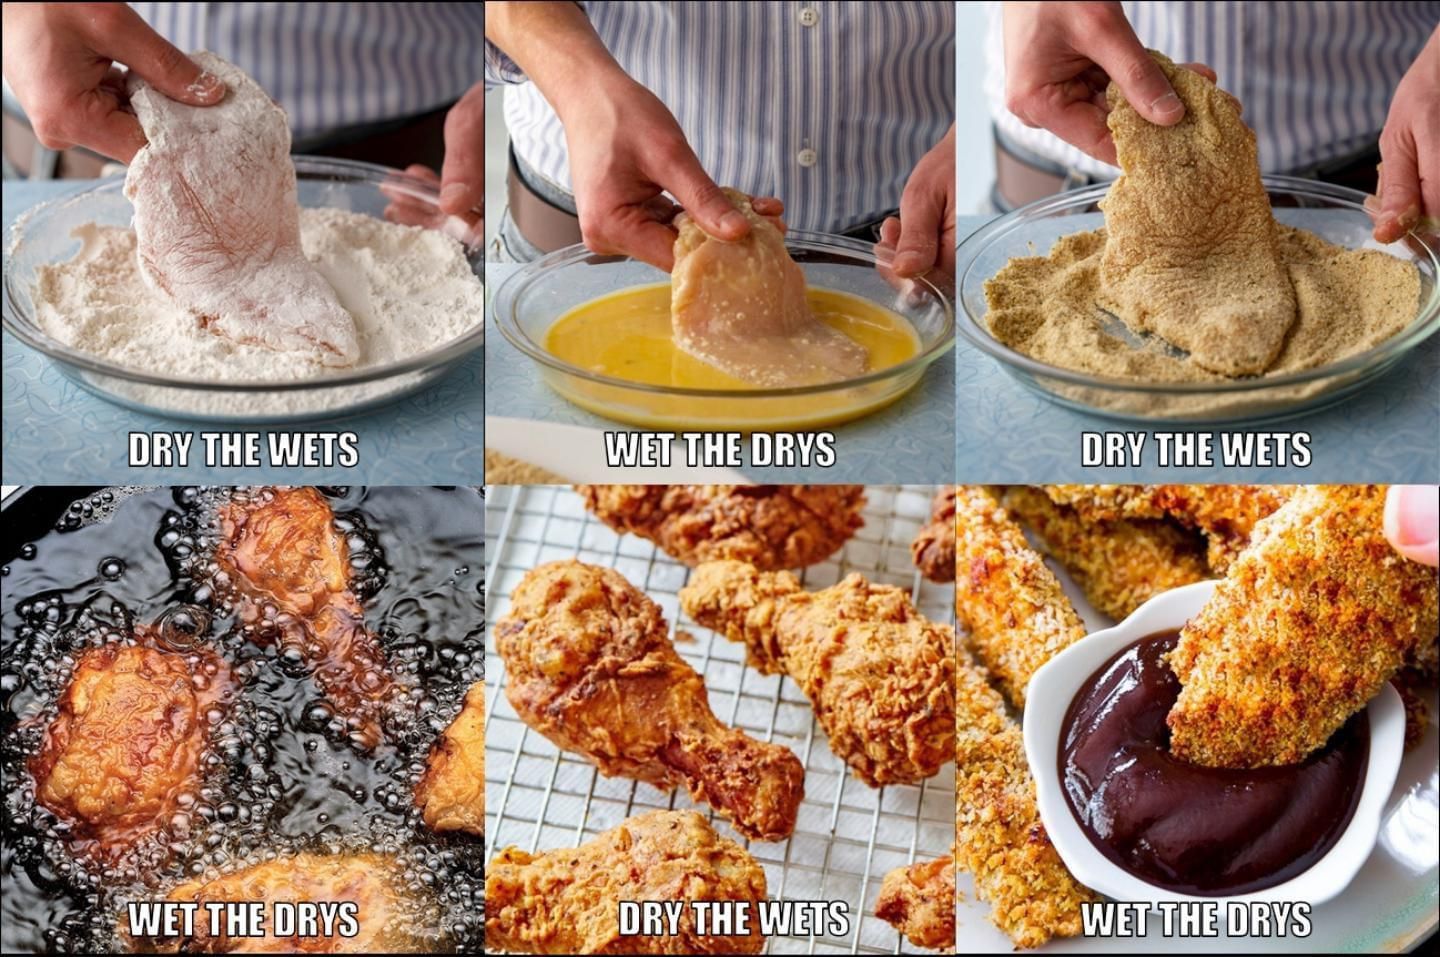 Do you like your chicken wet or dry?